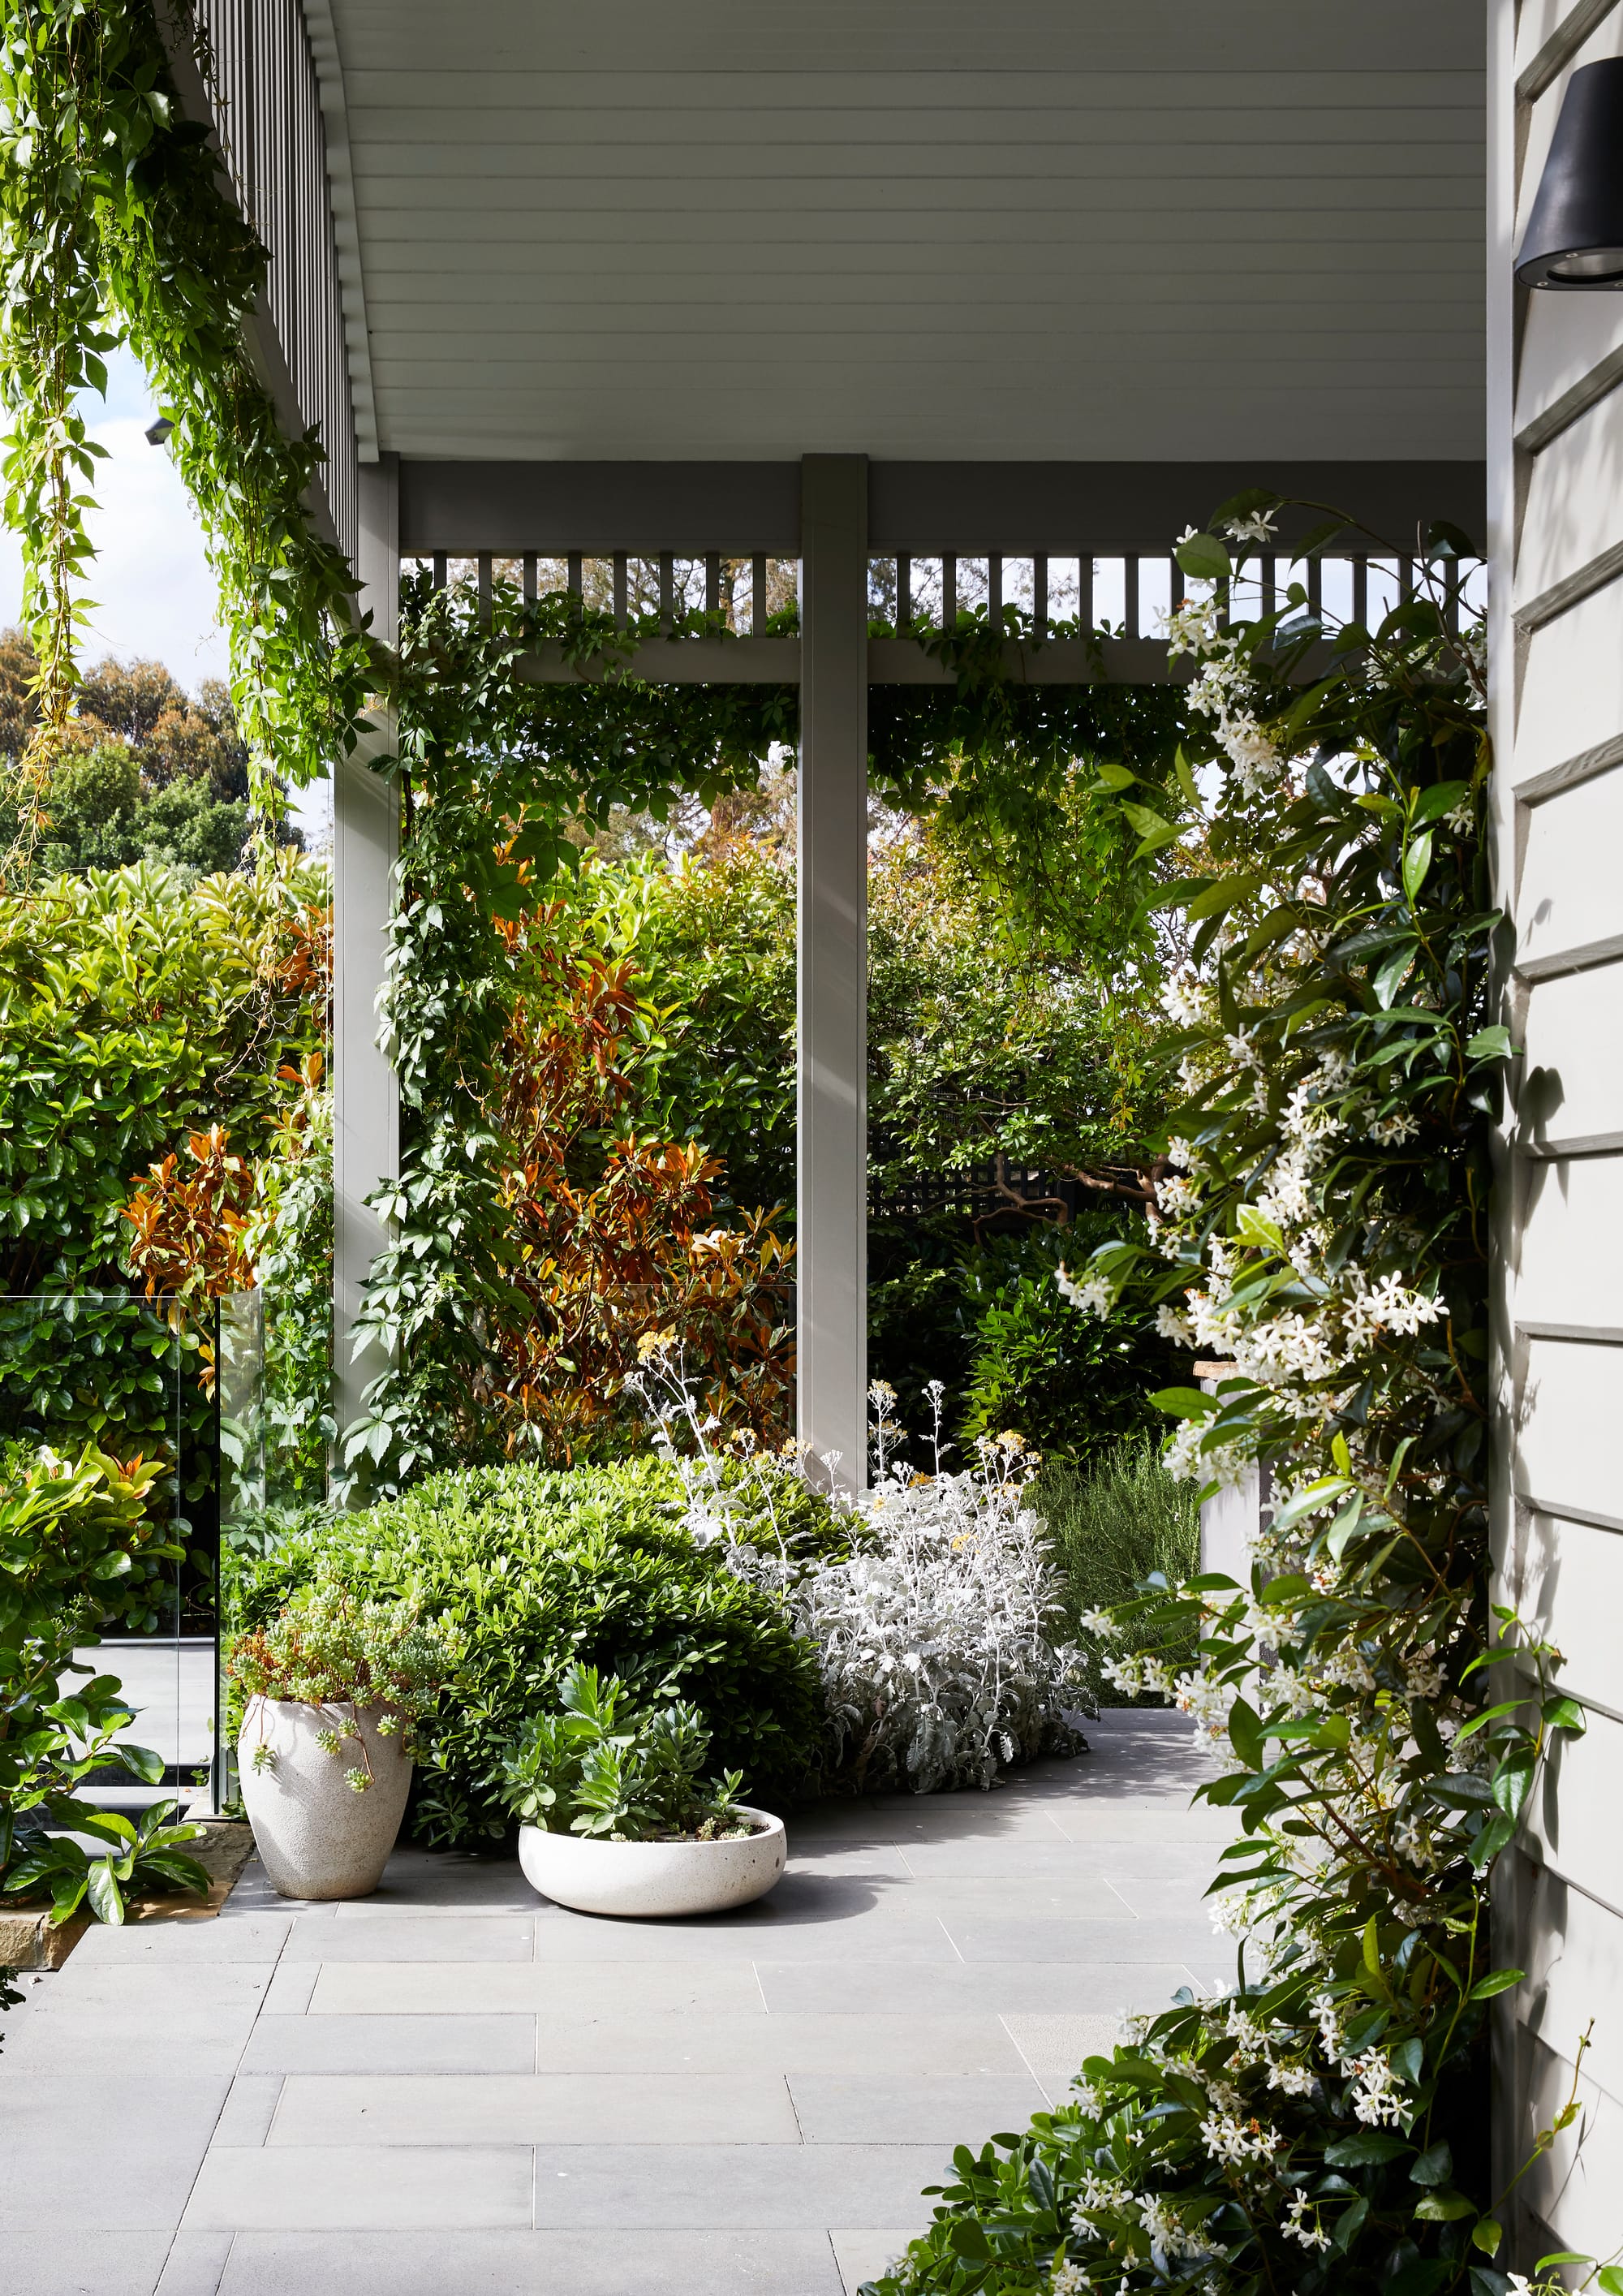 Julie Crowe Landscape Design. Photography by Caitlin Mills Photography. Crawling plant with white flowers growing over the external facade of white clad home along verandah. 